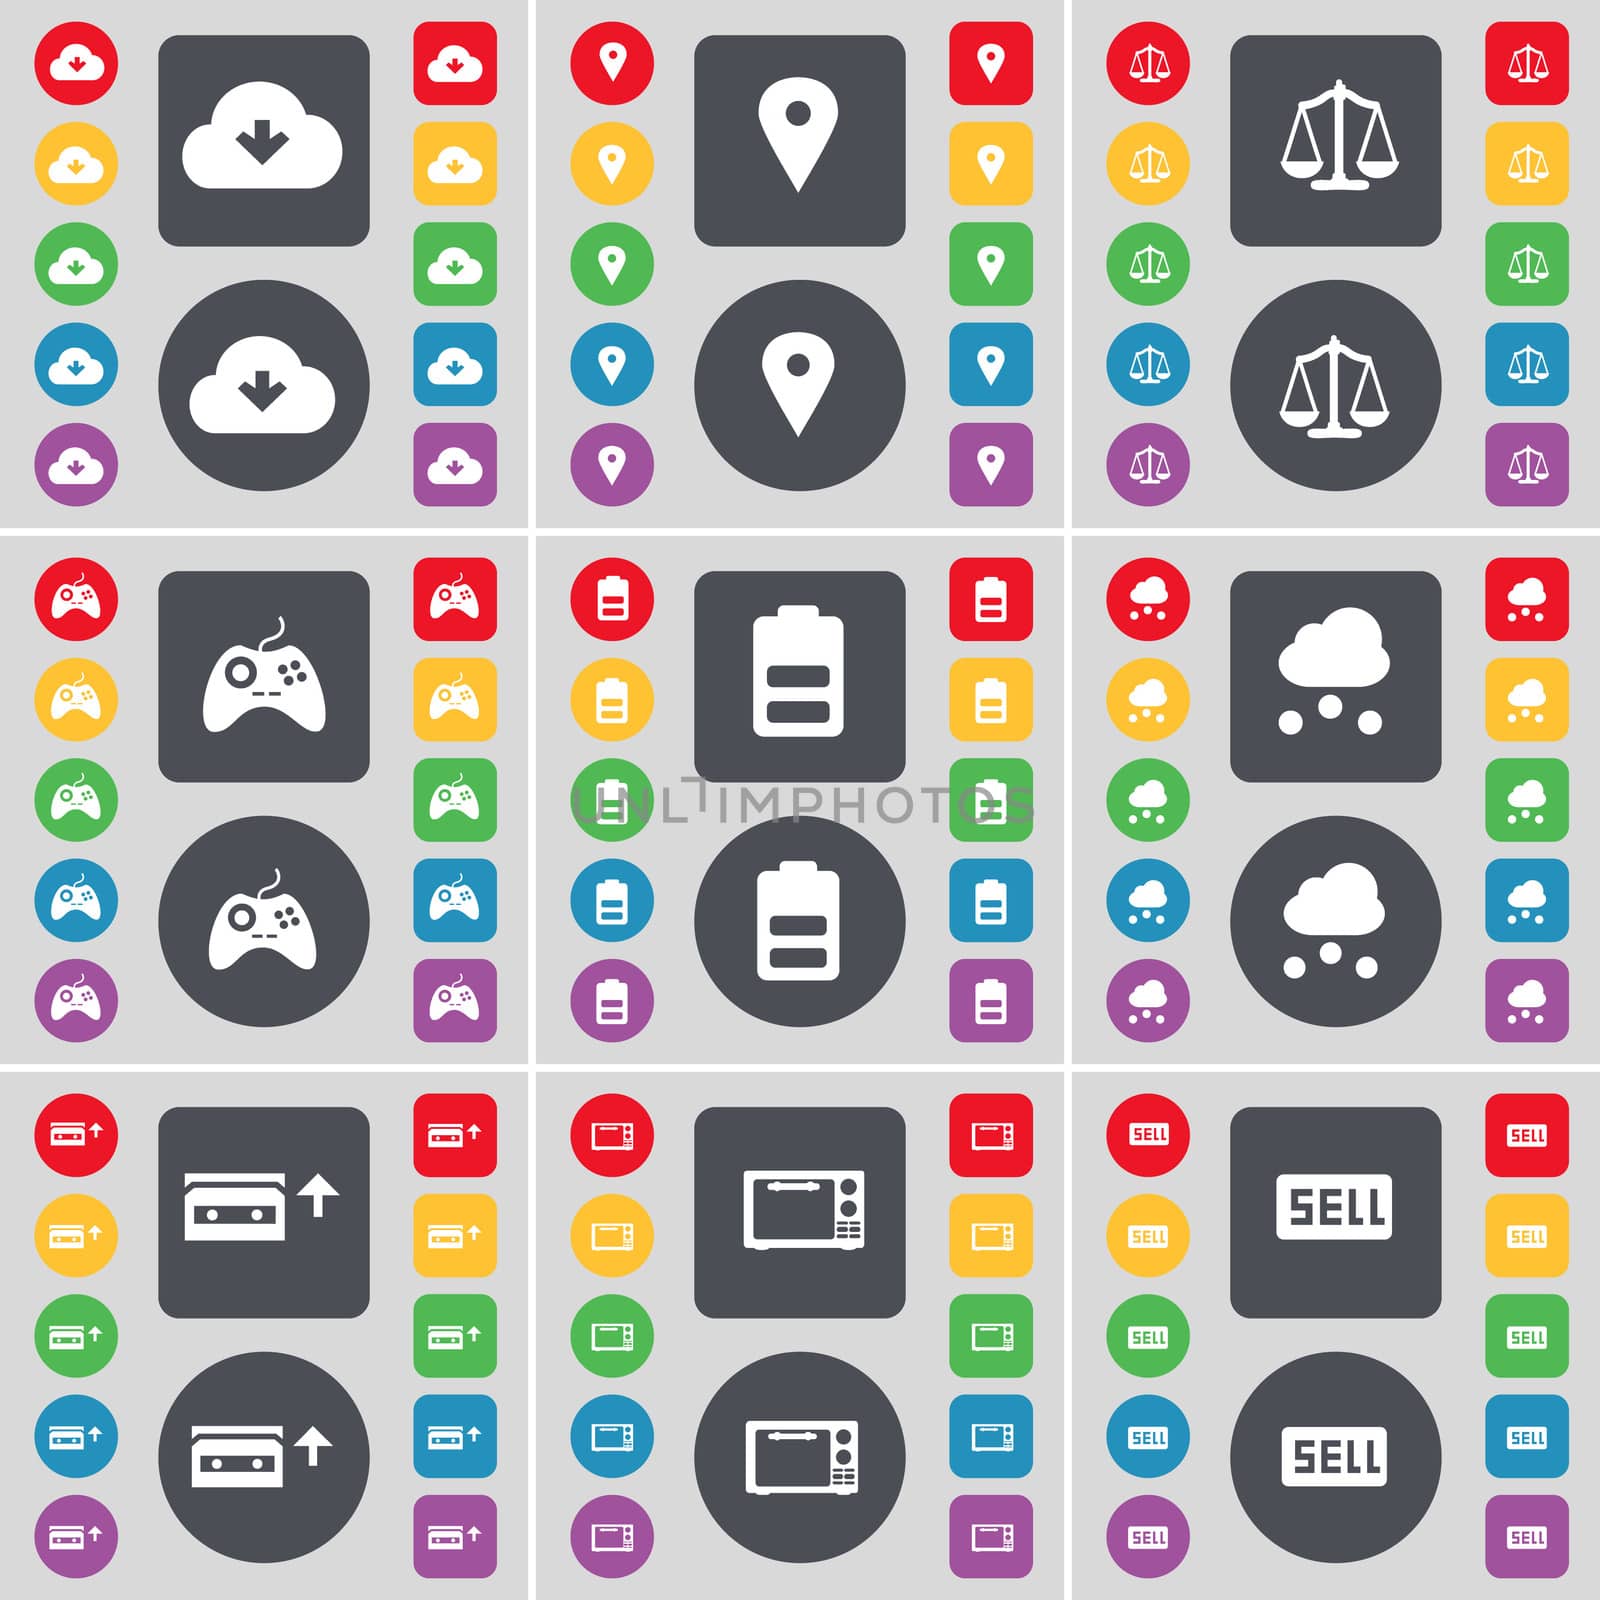 Cloud, Checkpoint, Scales, Gamepad, Battery, Cloud, Cassette, Microwave, Sell icon symbol. A large set of flat, colored buttons for your design. illustration